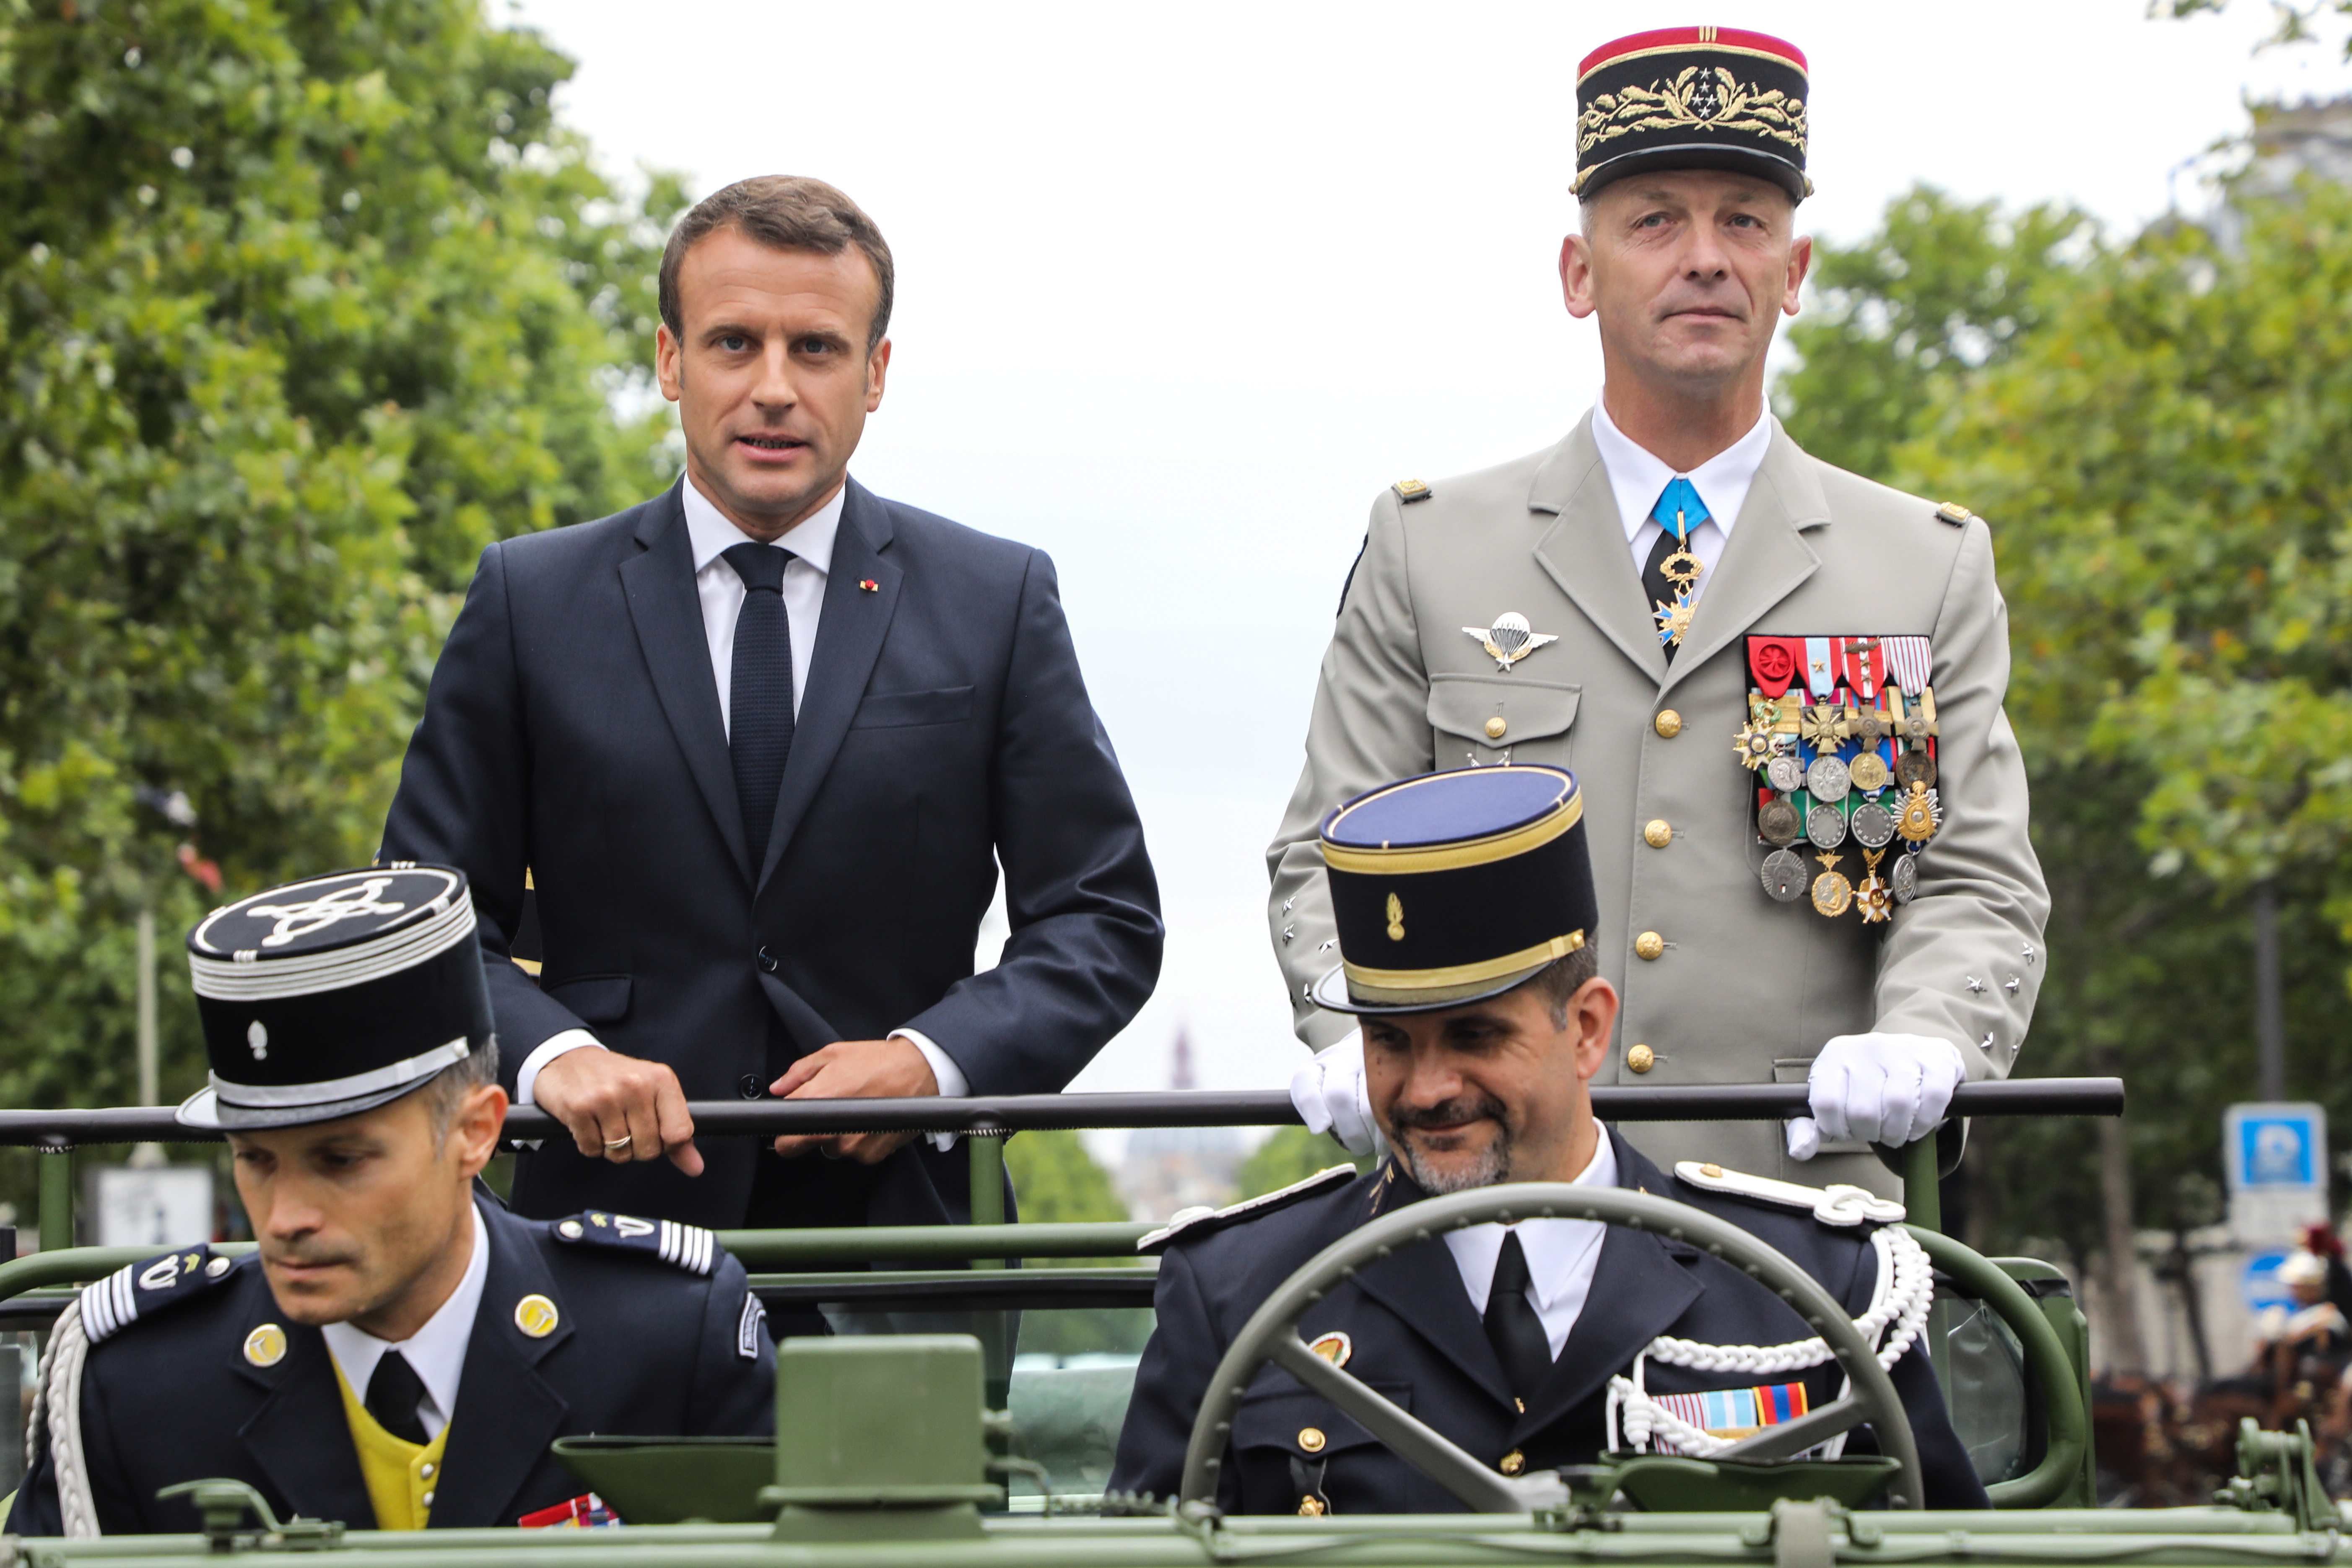 epa07715842 France's President Emmanuel Macron (L) stands in an Acmat VLRA vehicle next to French Armies Chief Staff General Francois Lecointre as they review troops before the start of the Bastille Day military parade down the Champs-Elysees avenue in Paris, France, 14 July 2019.  EPA/LUDOVIC MARIN / POOL  MAXPPP OUT